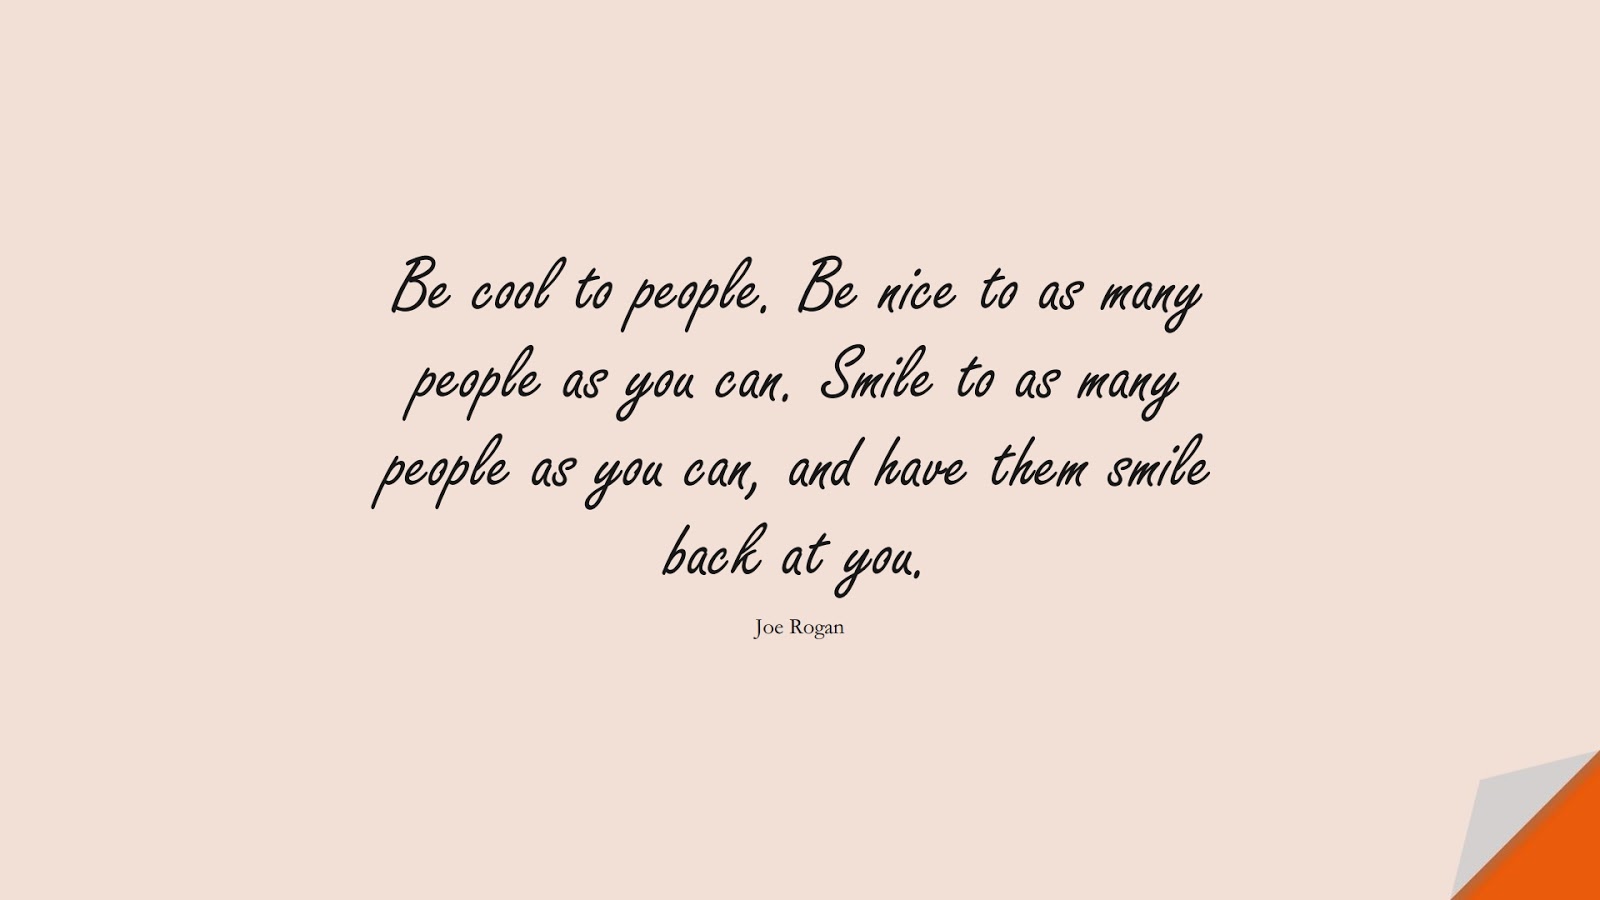 Be cool to people. Be nice to as many people as you can. Smile to as many people as you can, and have them smile back at you. (Joe Rogan);  #FamousQuotes